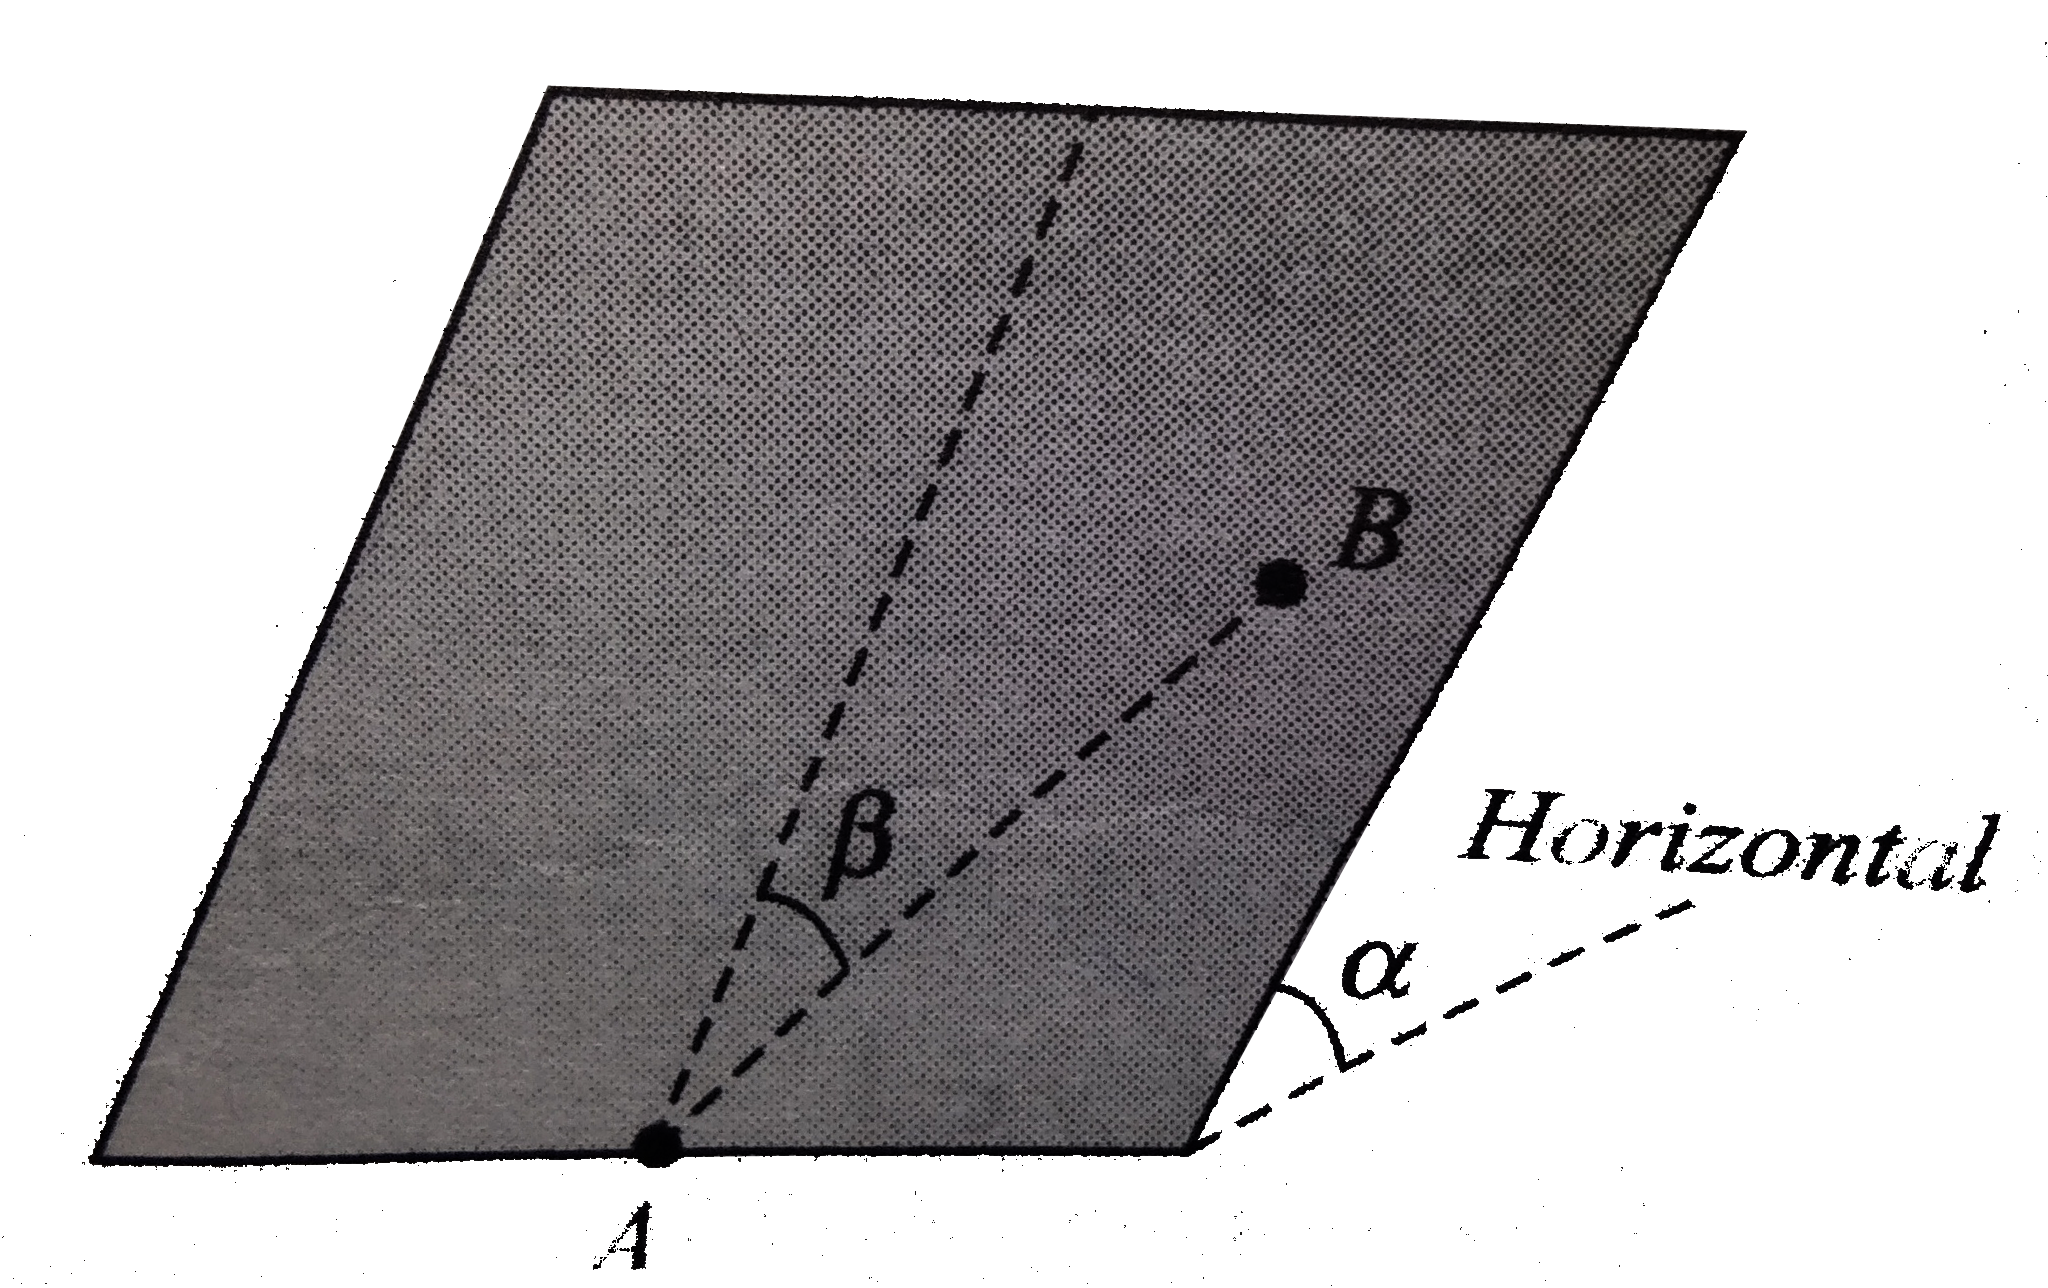 A charge particle A is fixed at the base of a uniform slope of inclination alpha. Another charge particle B is placed on the slope at an angular position beta measured from the line of greatest slope passing through the position of the first particle. The coefficient of froction between the particle B and the slope is mu(mu lt tan alpha) .For the particle at B to stay in equilibrium what would be the maximum value of the angle beta ?